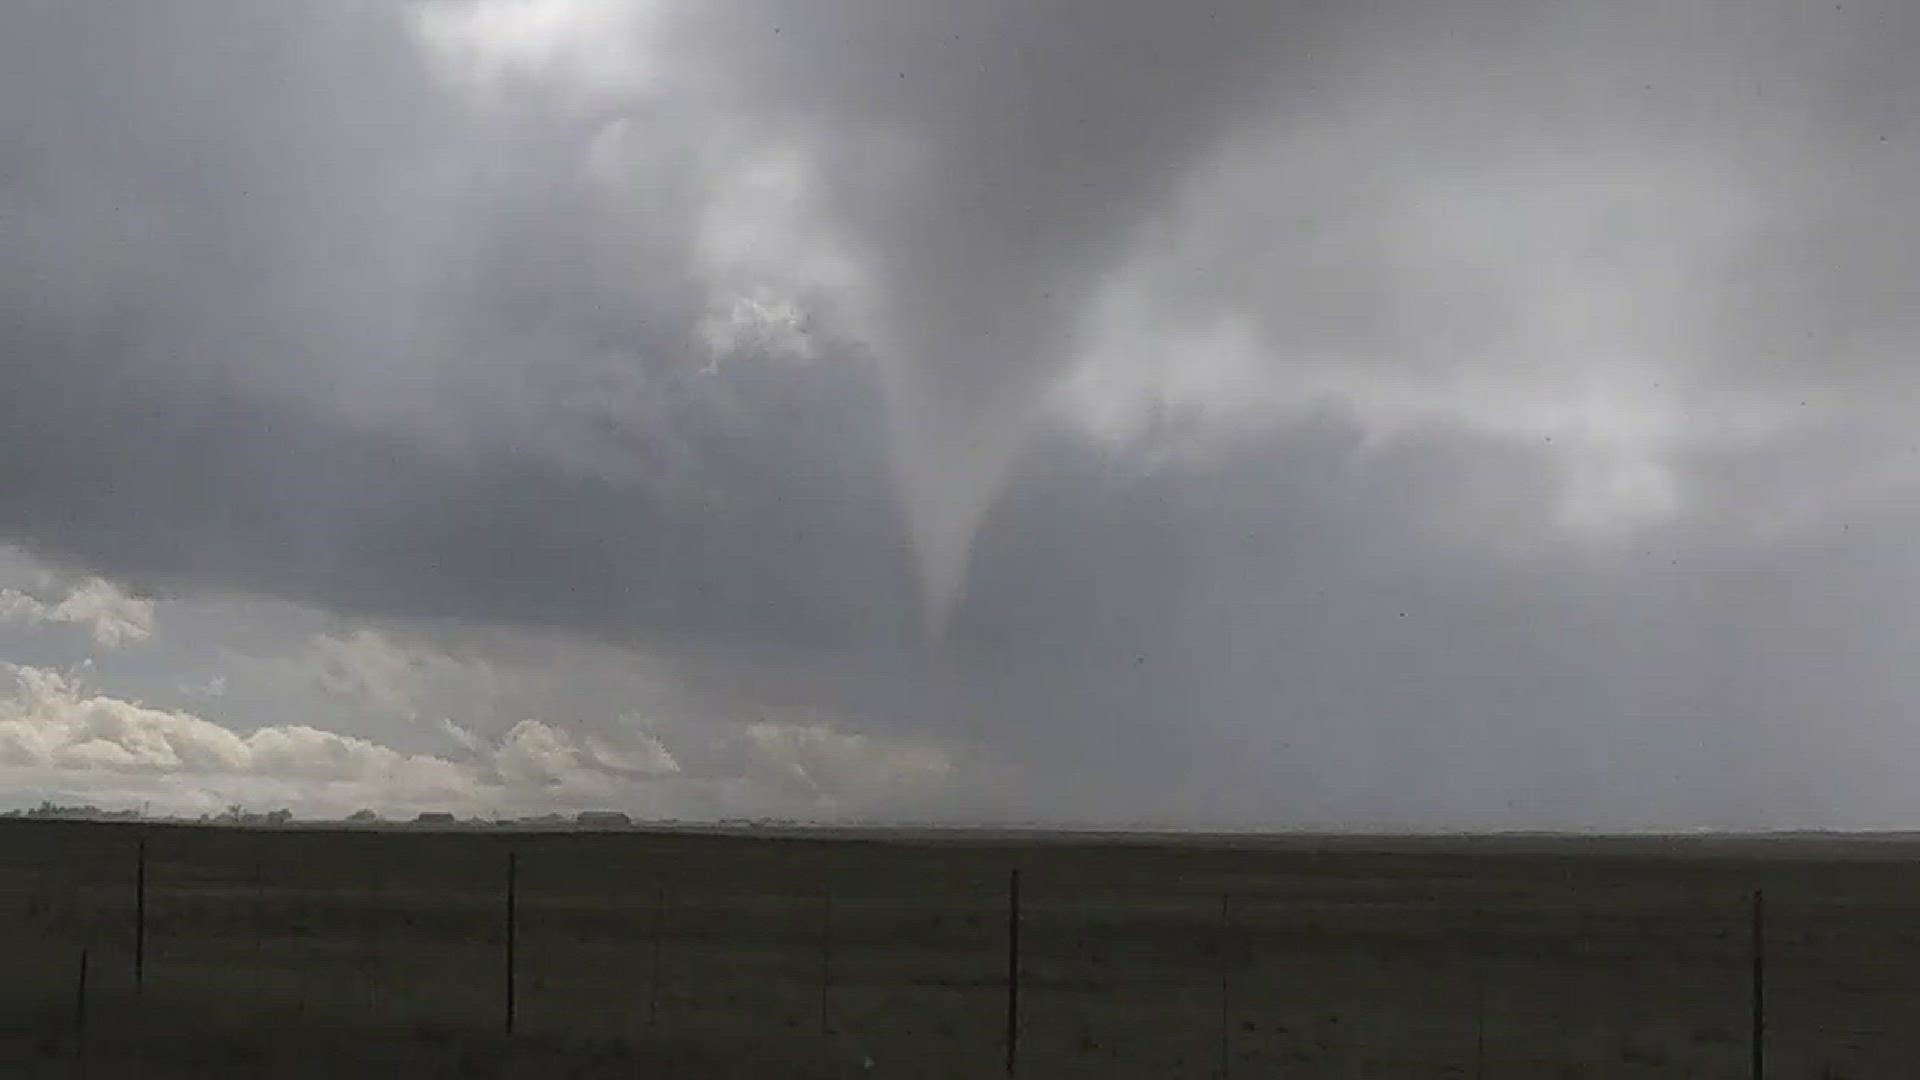 A tornado touched down about 5 miles northeast of Falcon in El Paso County on Friday, the National Weather Service confirmed. No injuries have been reported.